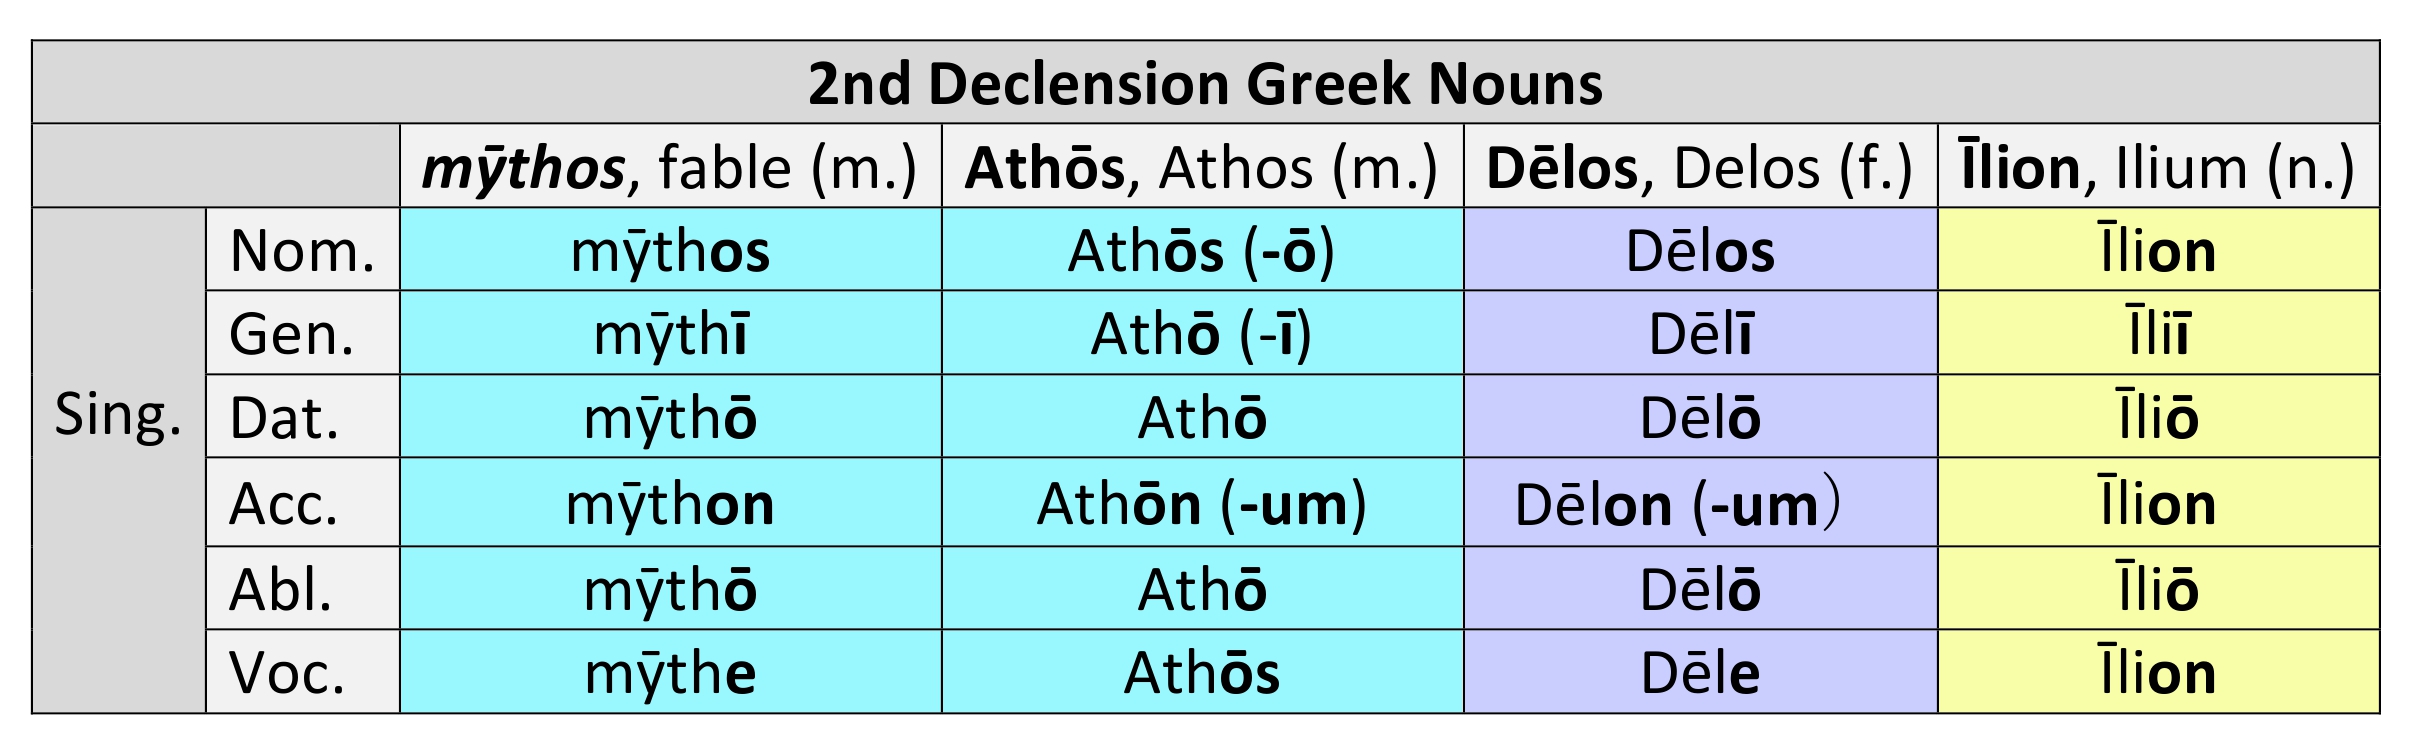 Paradigm for 2nd Declension nouns of Greek derivation